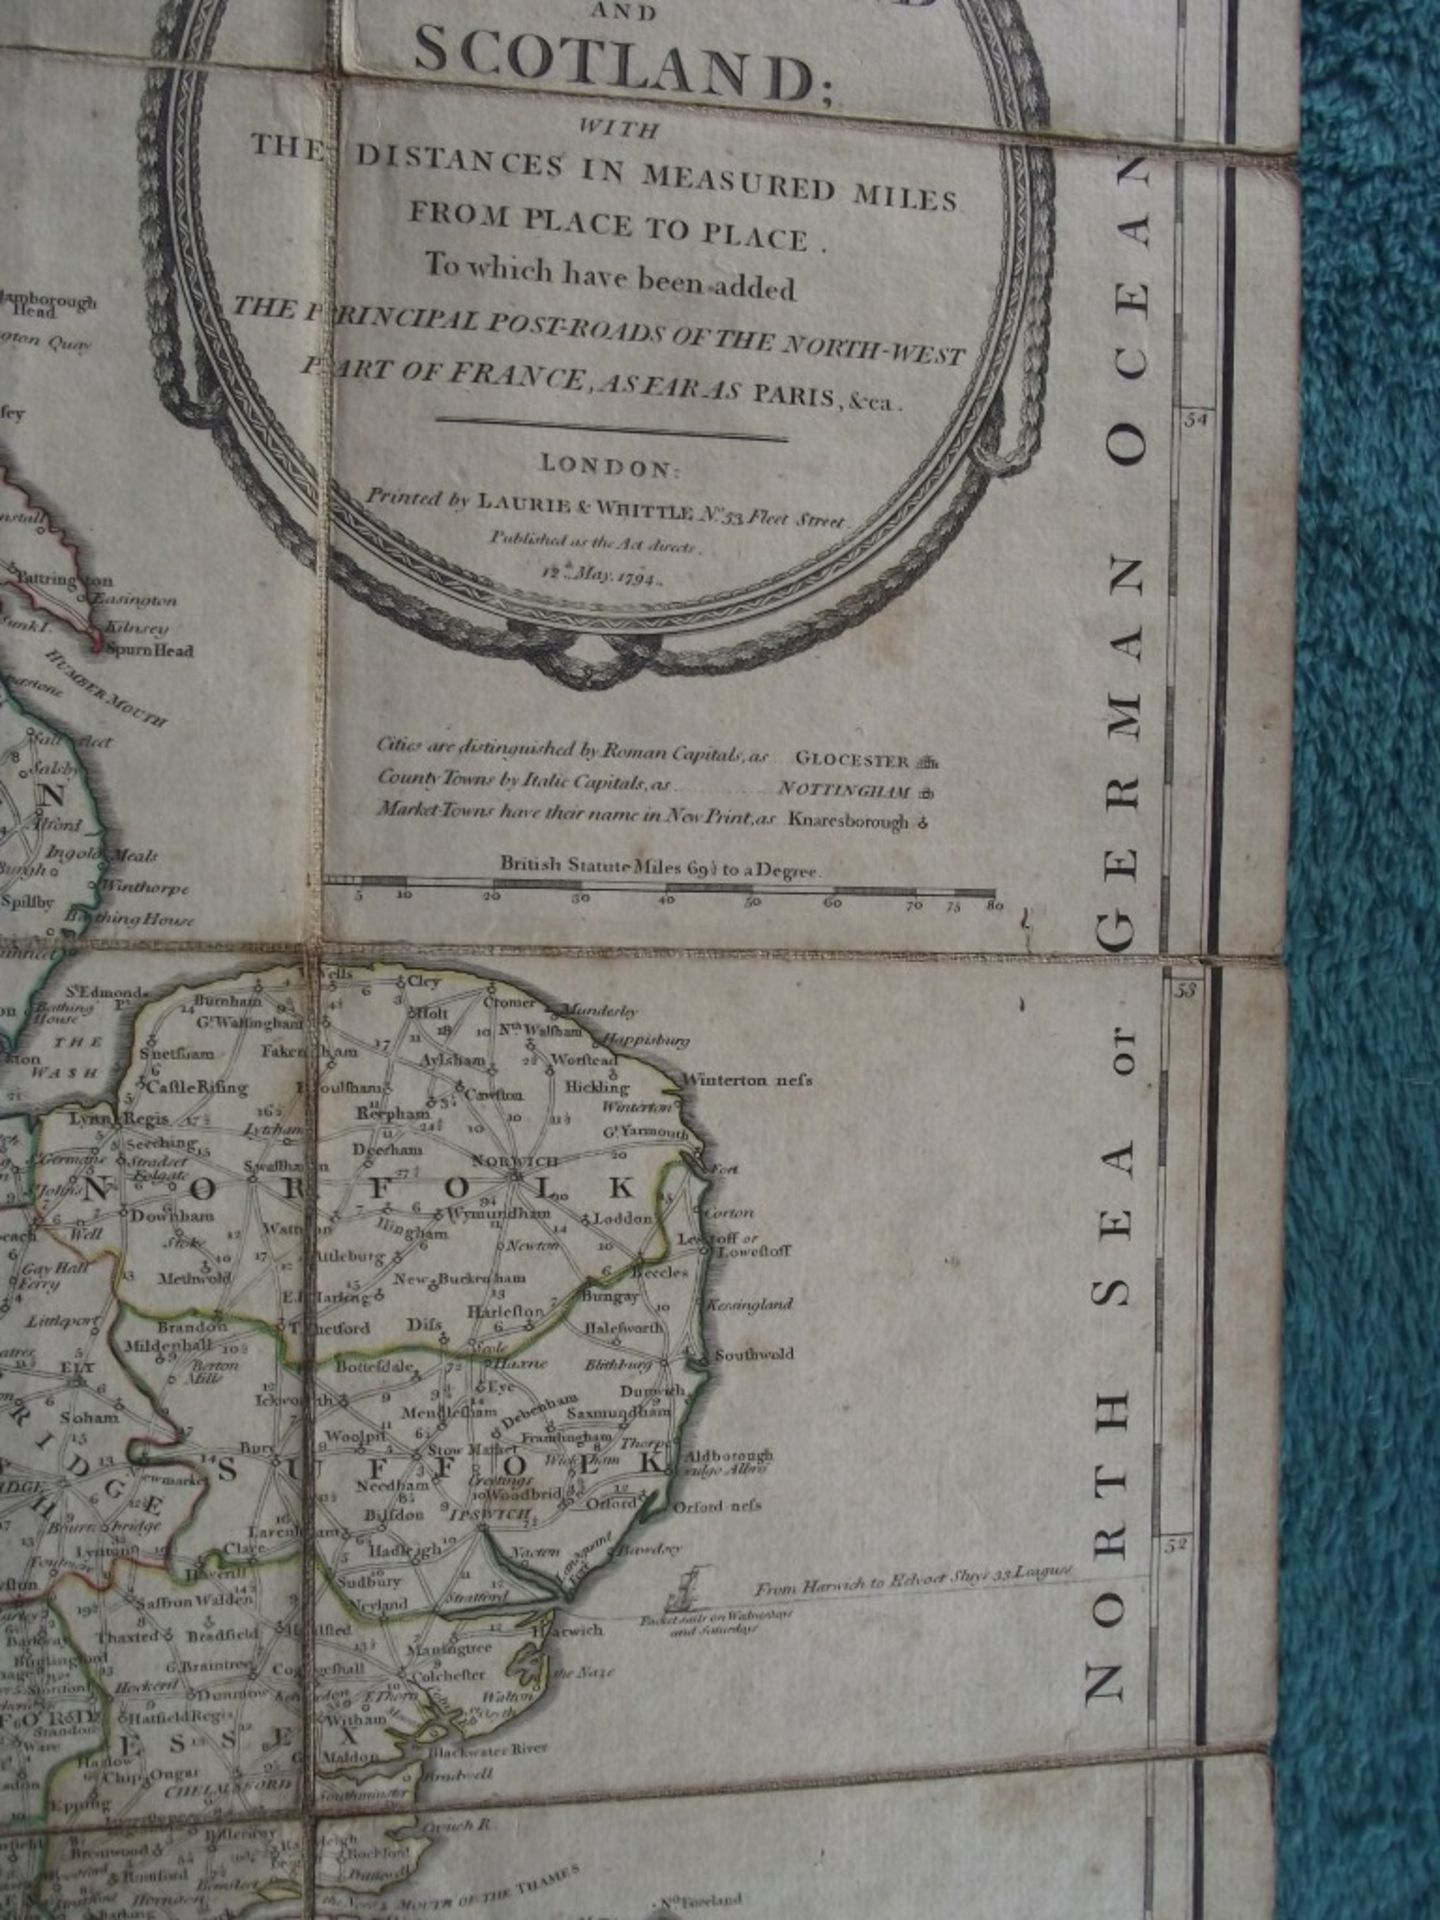 A New Map of the Roads of Ireland and Scotland - by Laurie & Whittle - 12th May 1794 - Original c... - Image 10 of 31